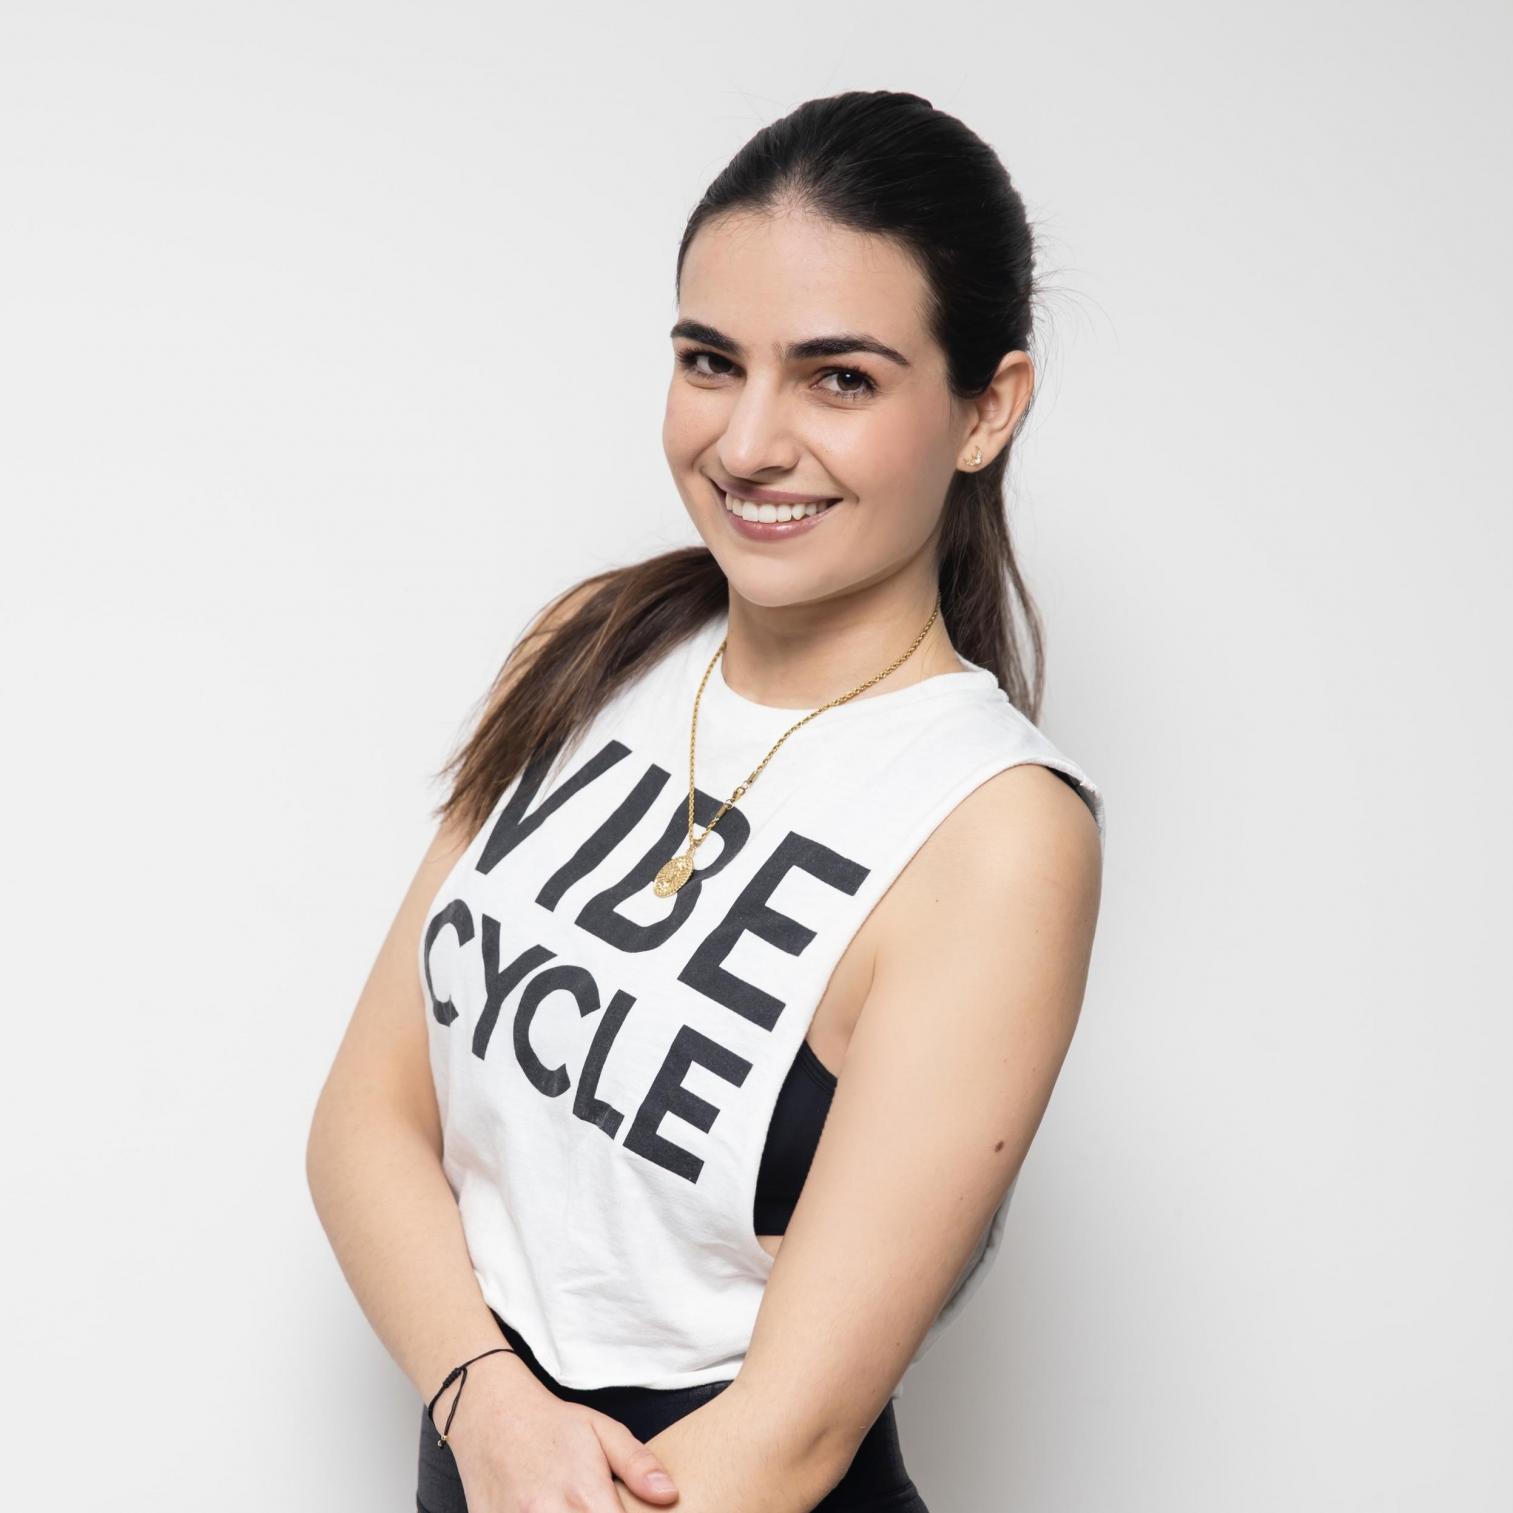 GABY | Instructores | VibeCycle